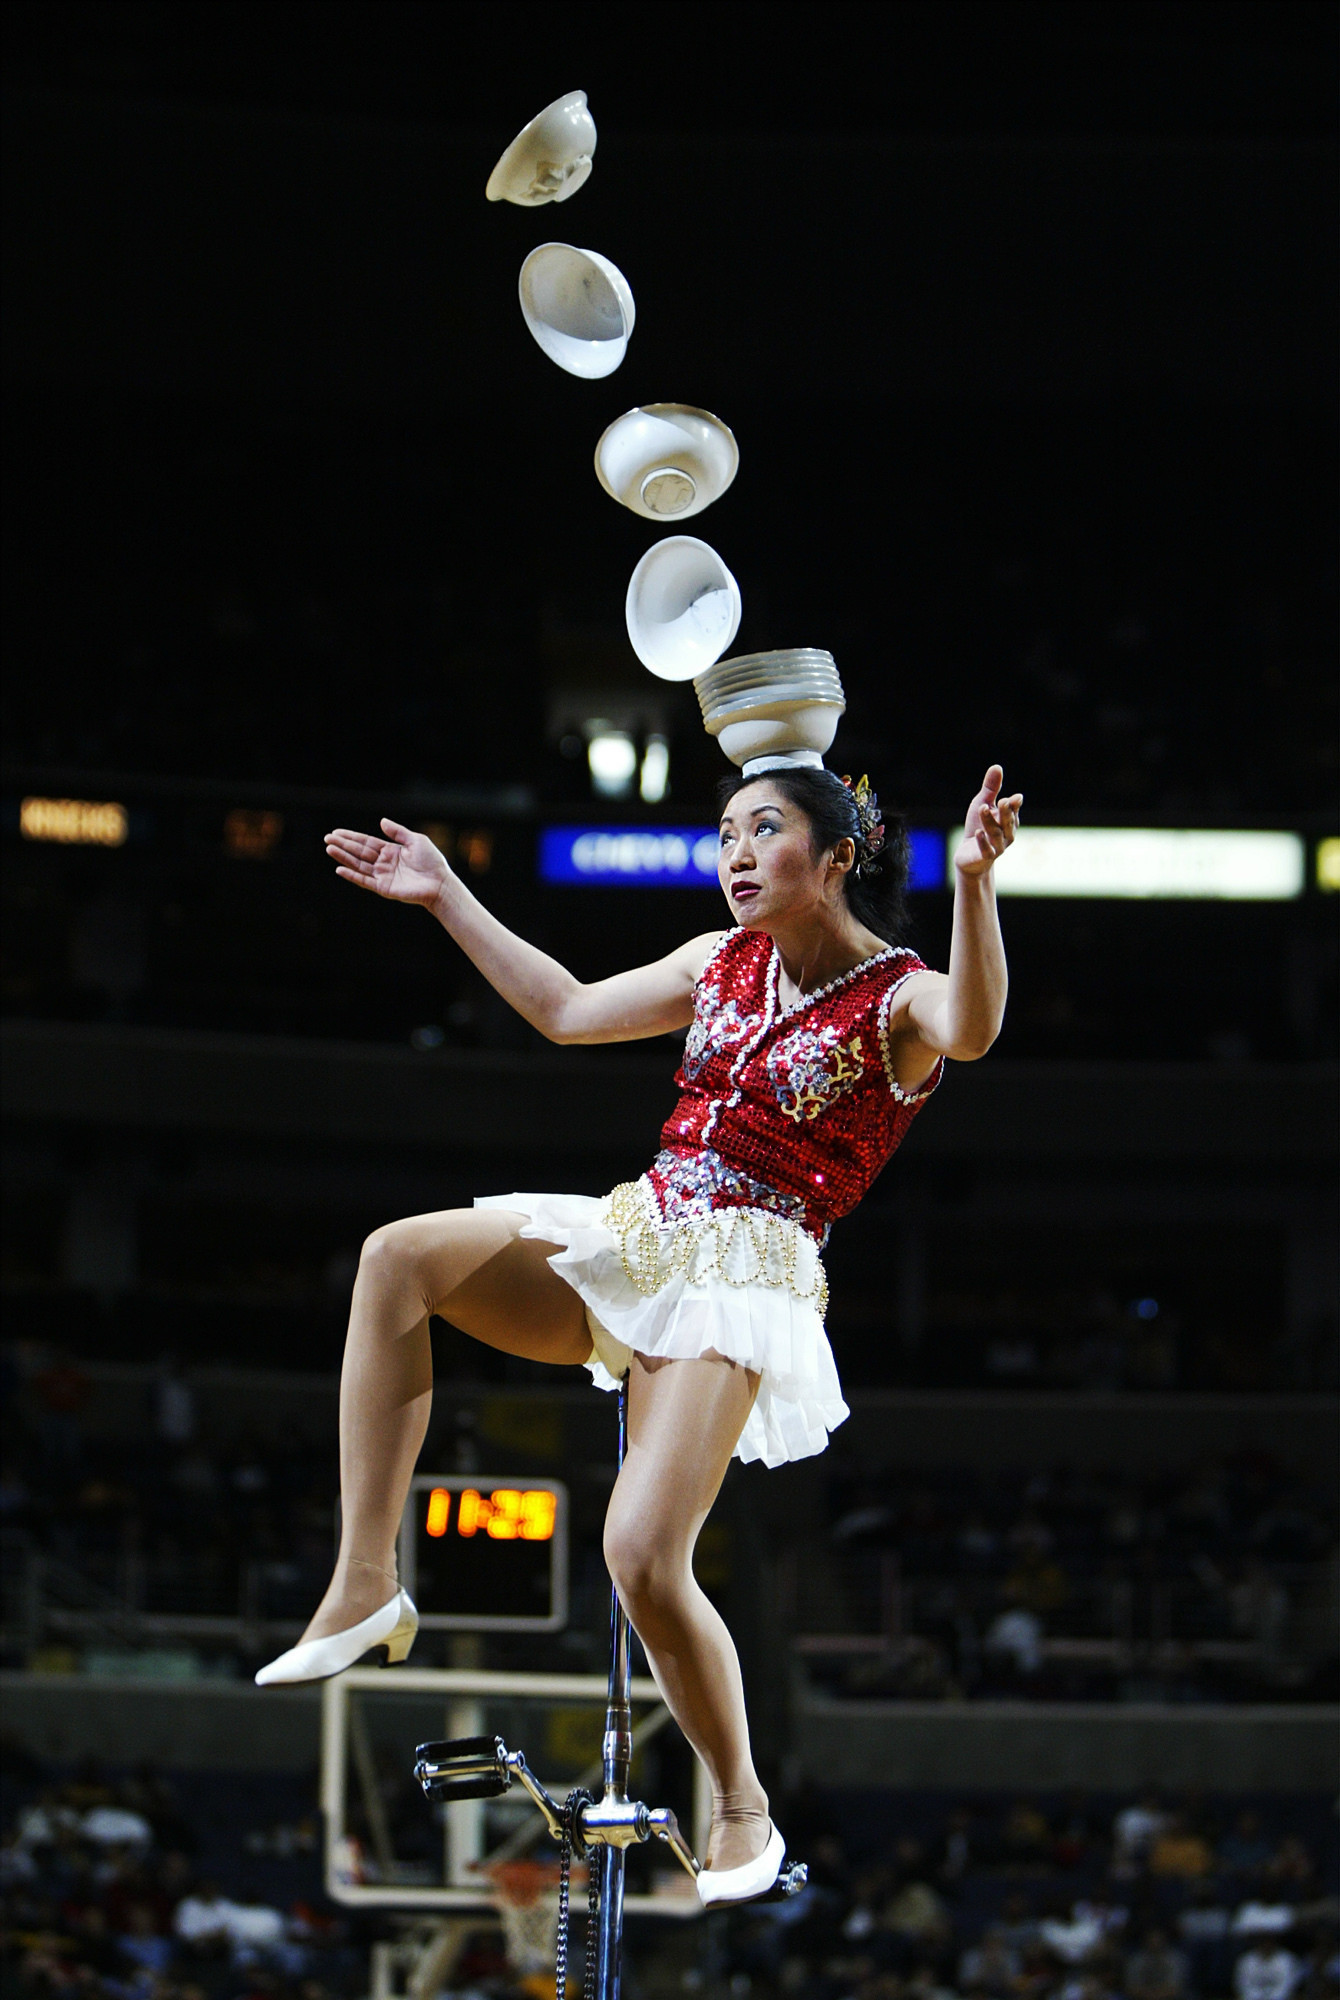 Warriors to replace Red Panda's stolen $25k unicycle - Chicago Tribune